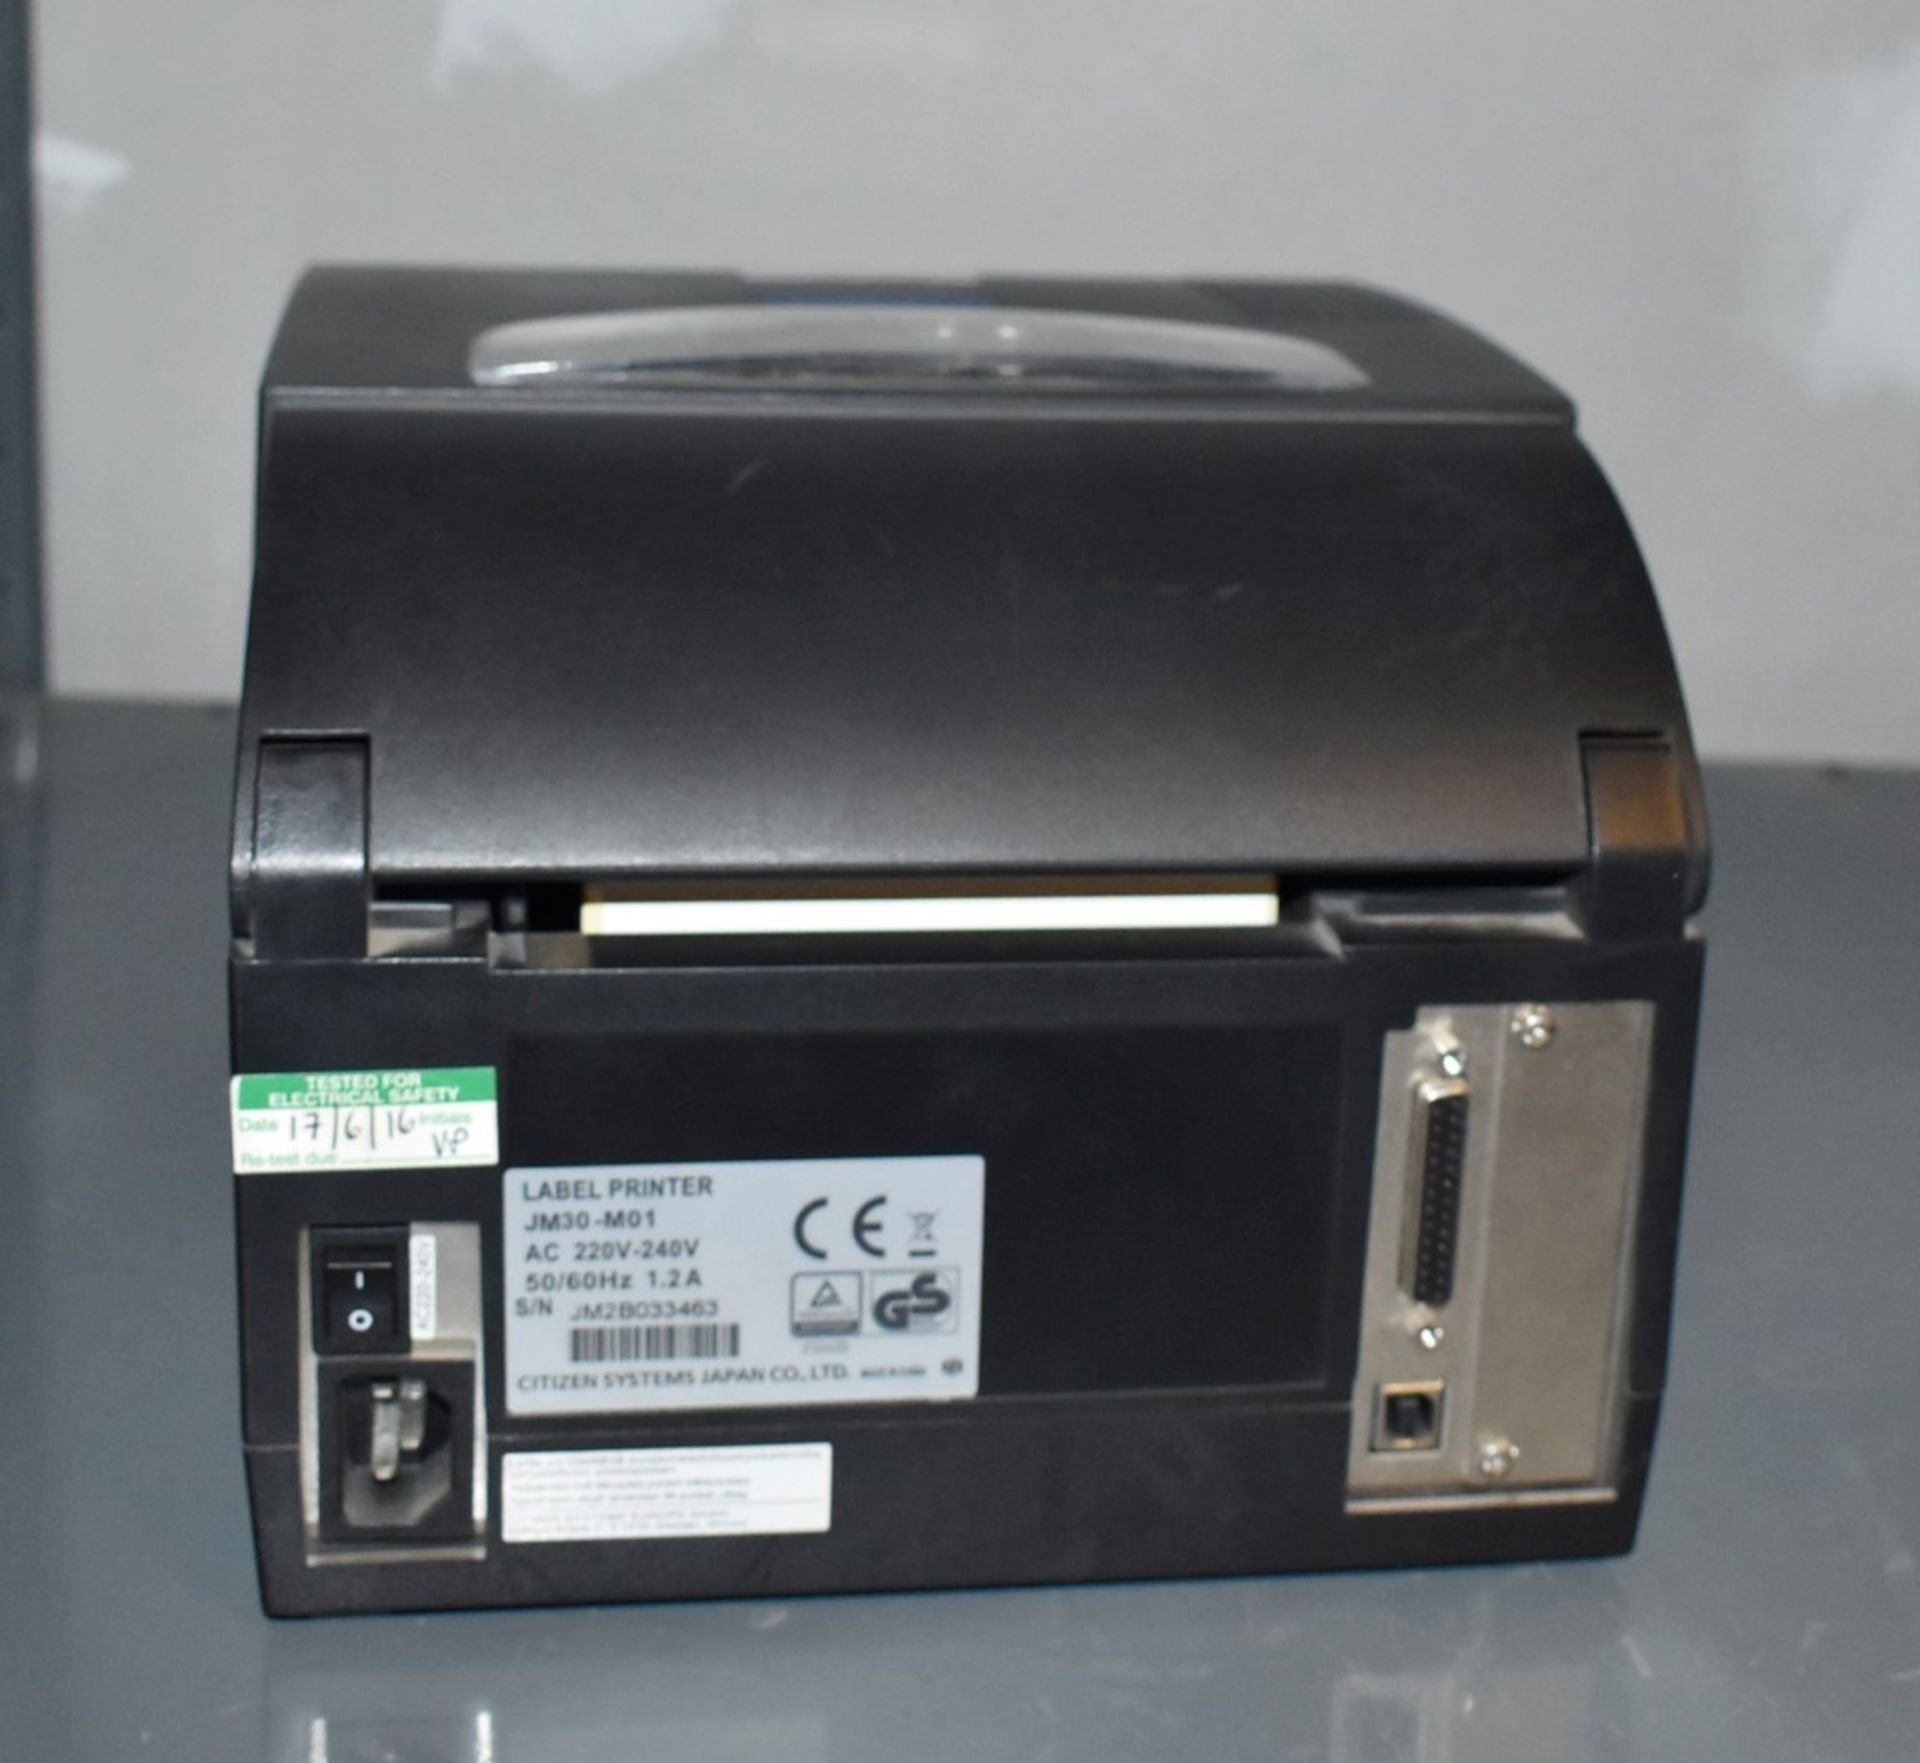 1 x Citizen CL-S521 Direct Thermal USB Label Printer - Includes One Roll of Labels, Power Lead and - Image 13 of 13